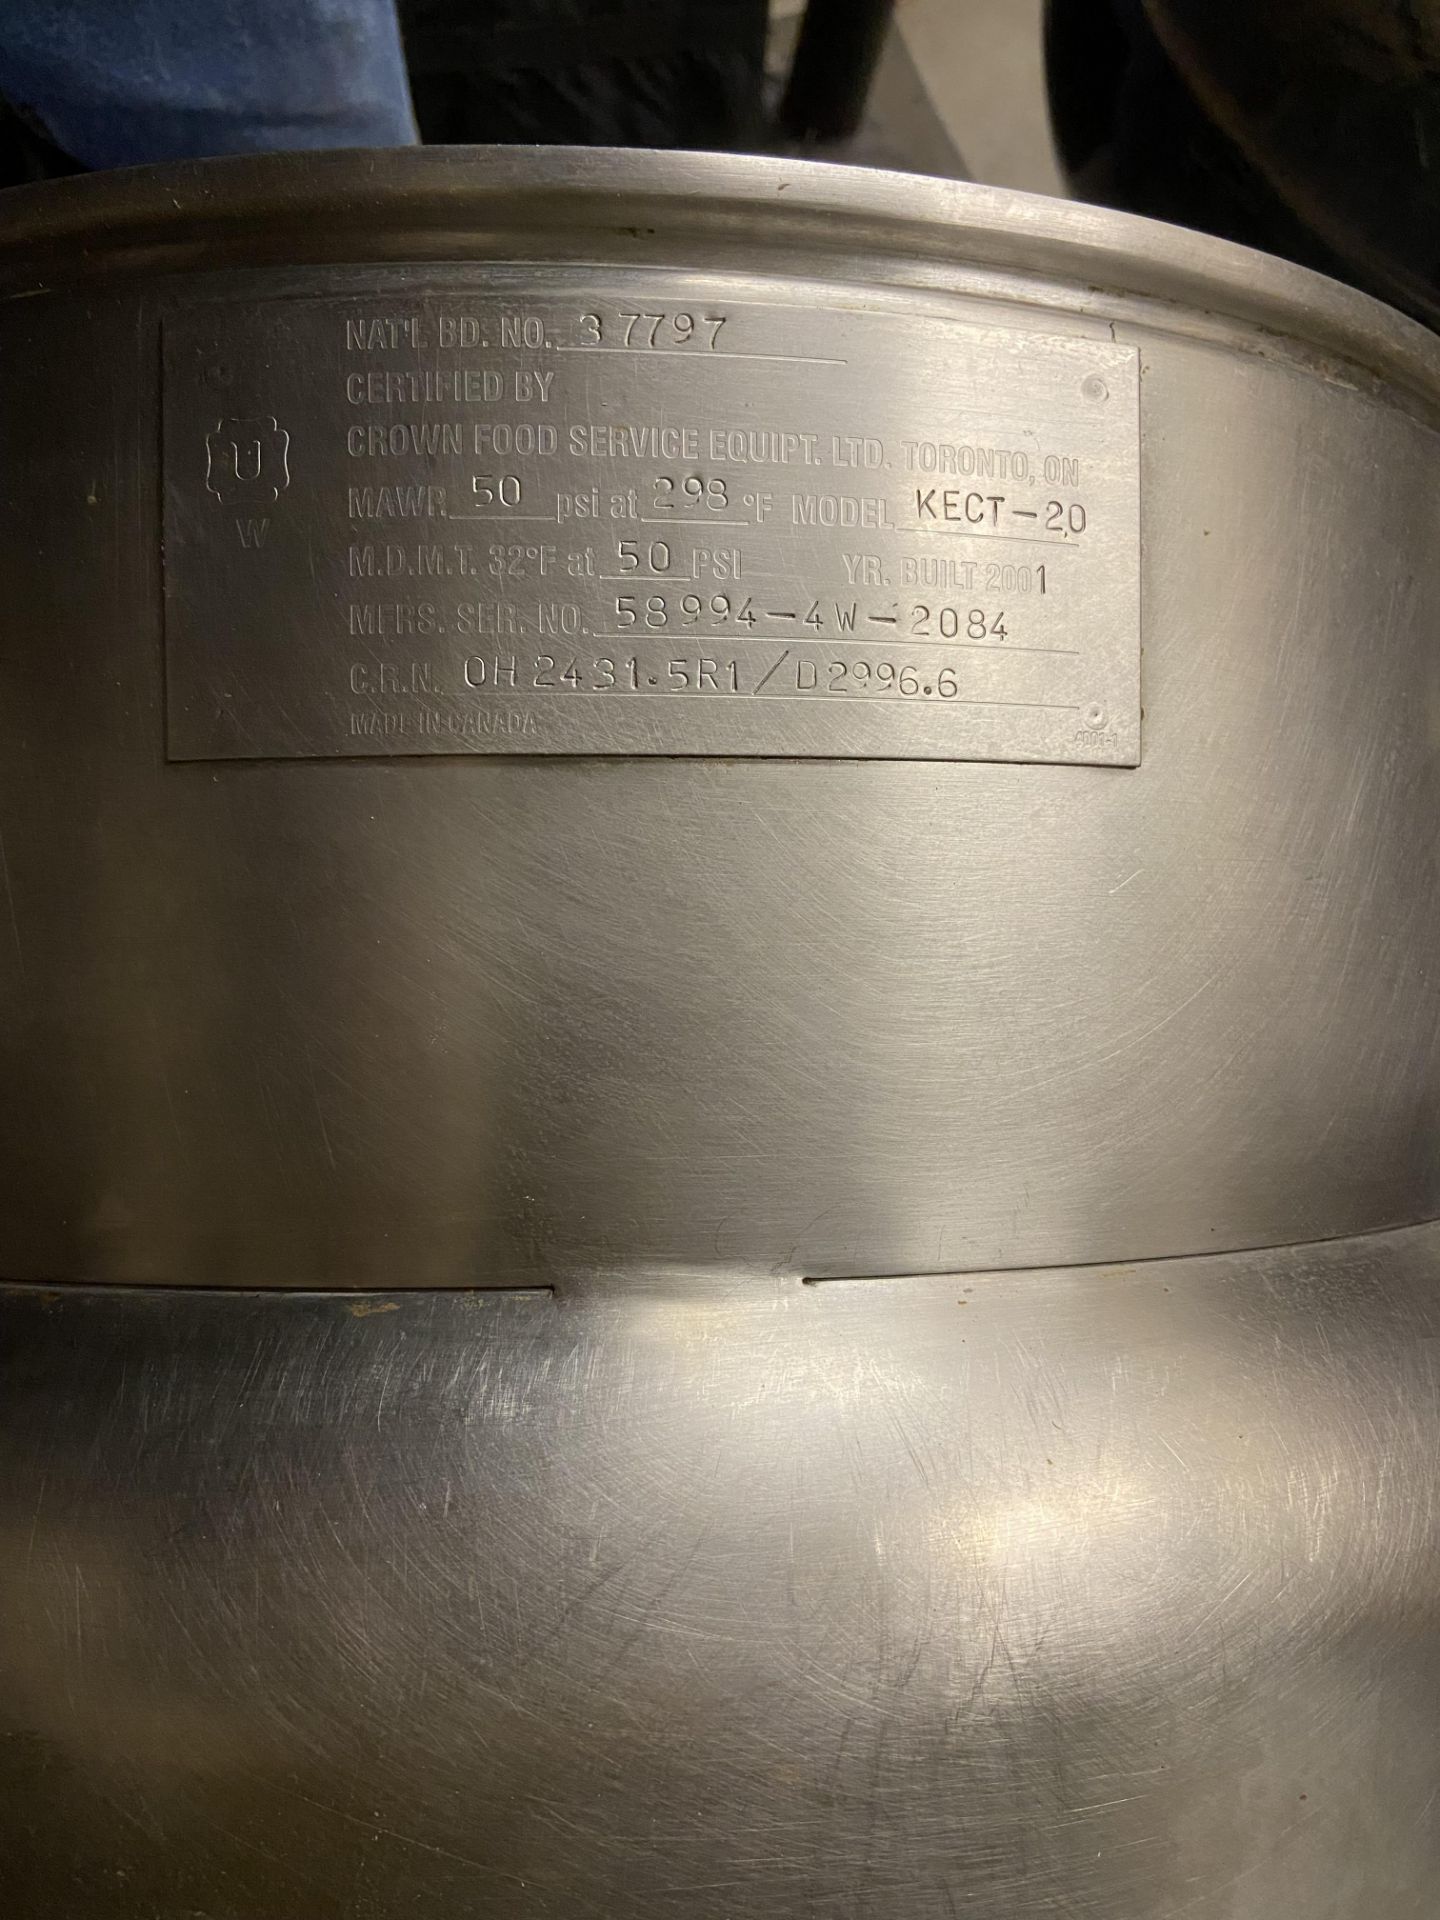 Groen Steam Kettle (Approx. 5 Gallon) - Subj to Bulk | Rig Fee $50 - Image 3 of 5